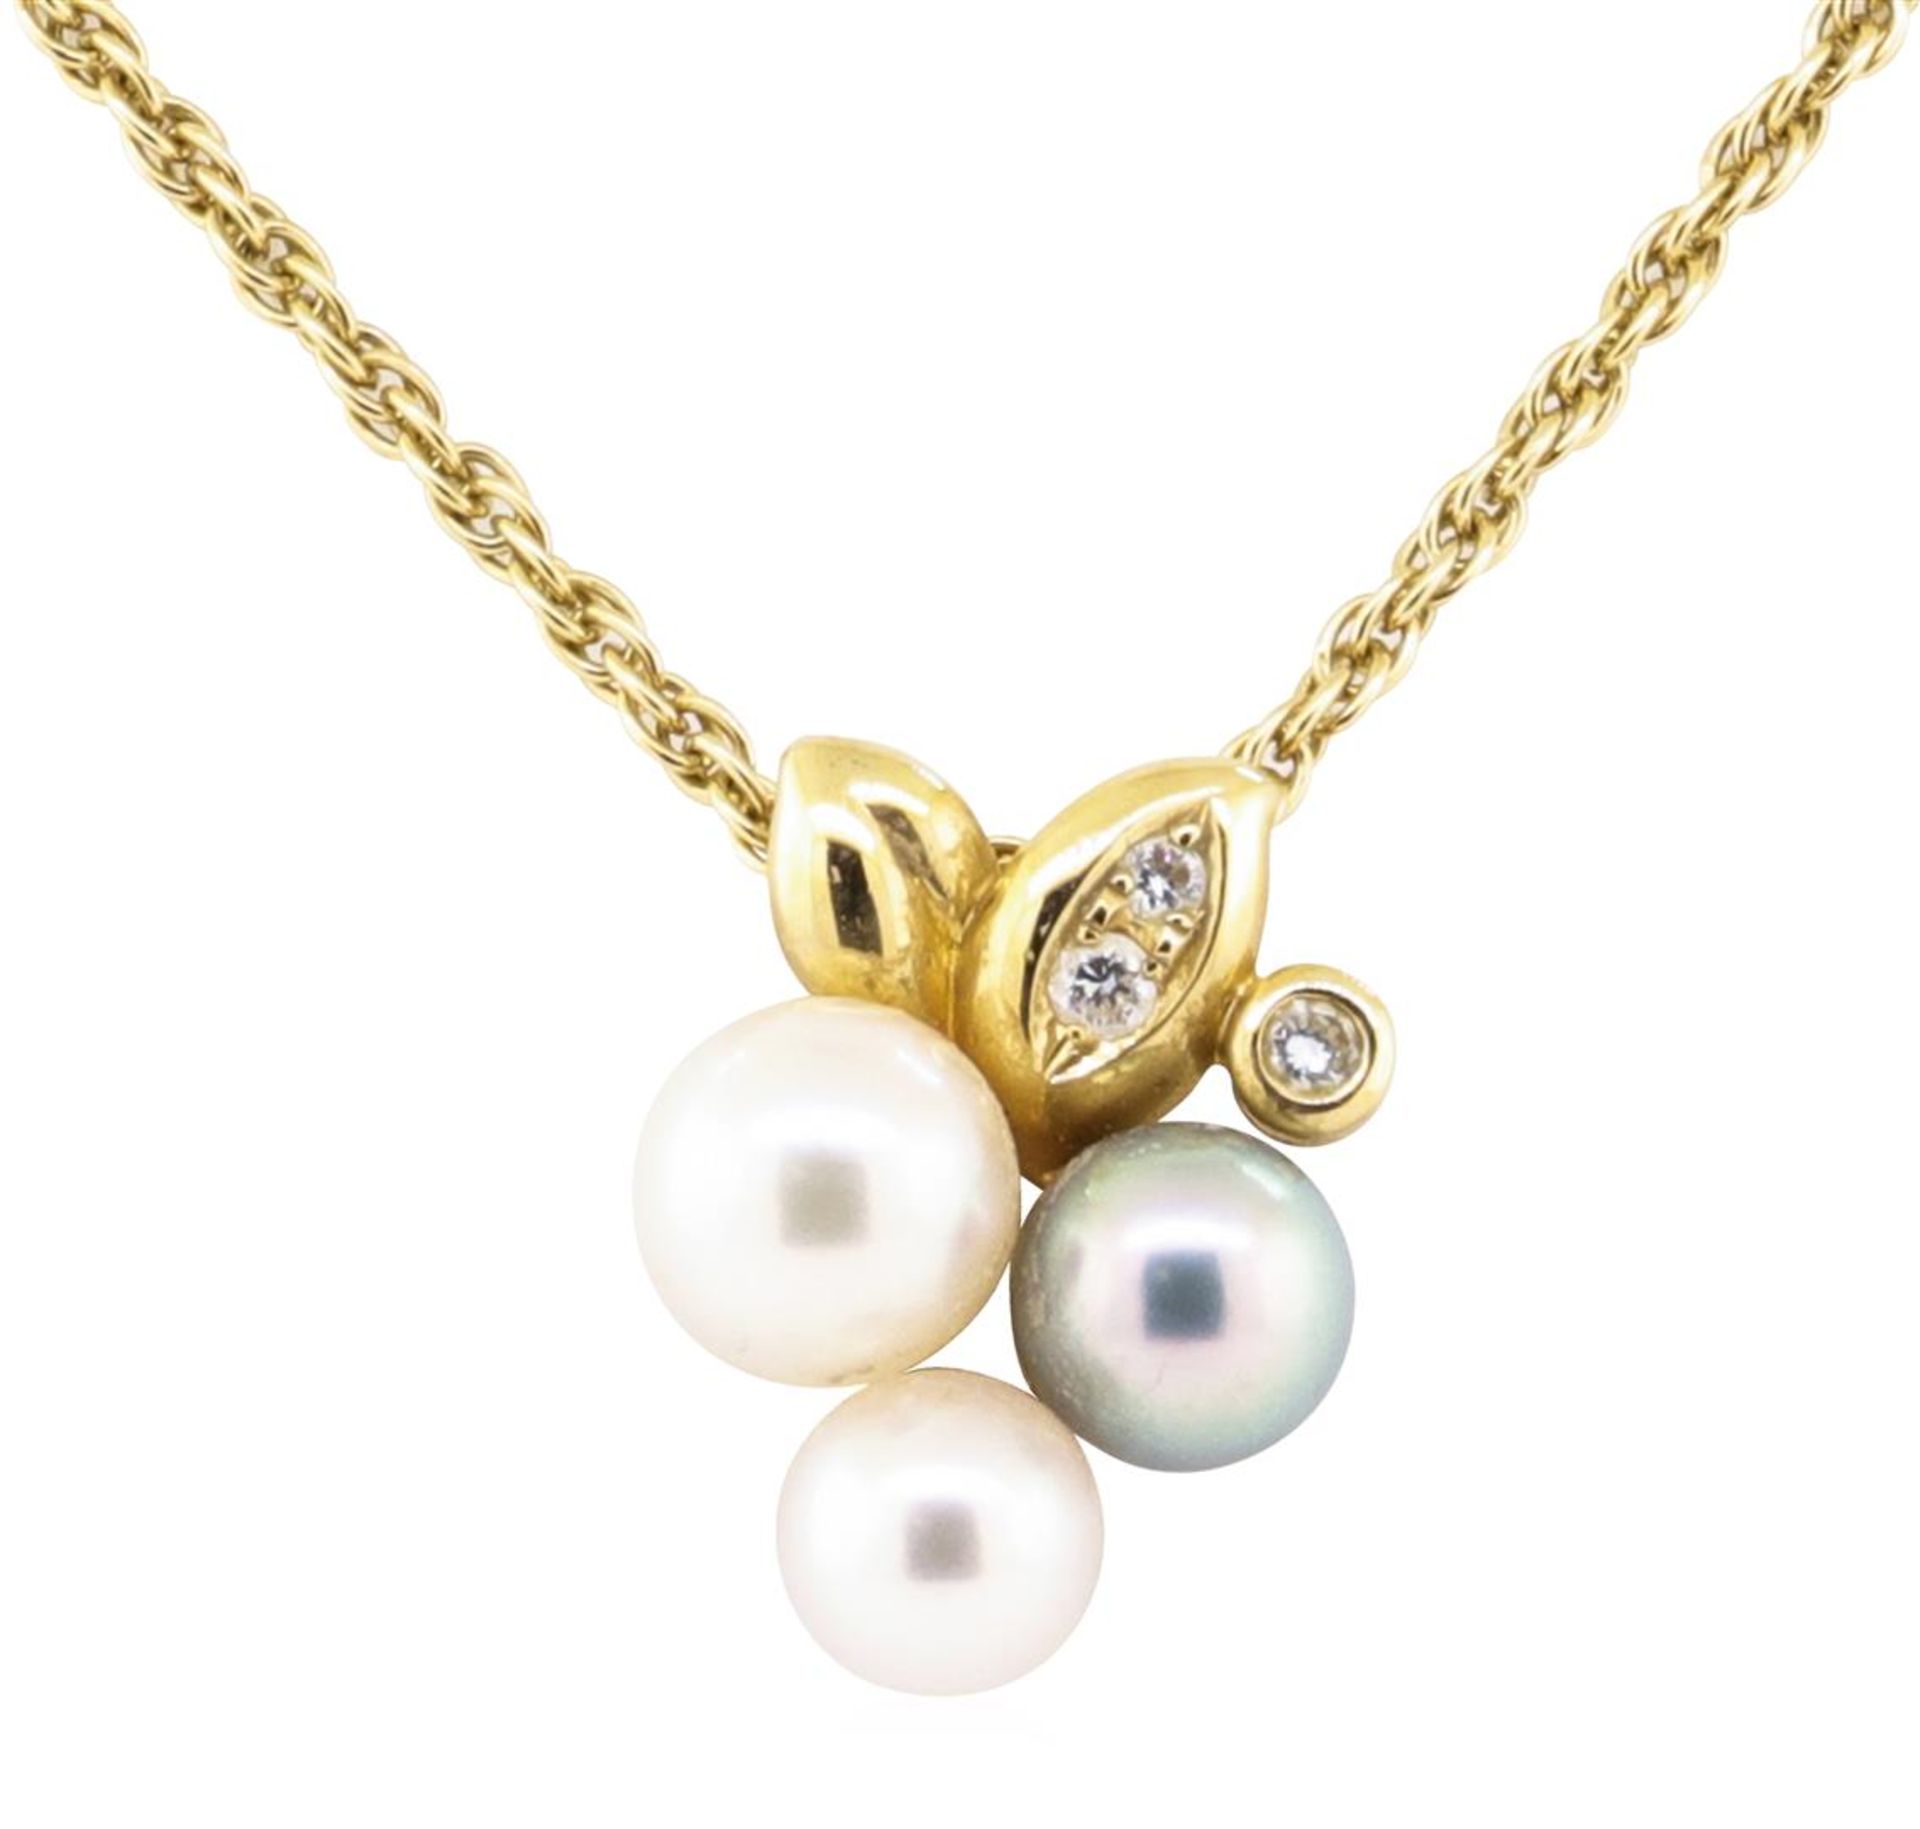 0.08 ctw Diamond and Pearl Pendant with Chain - 18KT Yellow Gold - Image 2 of 2